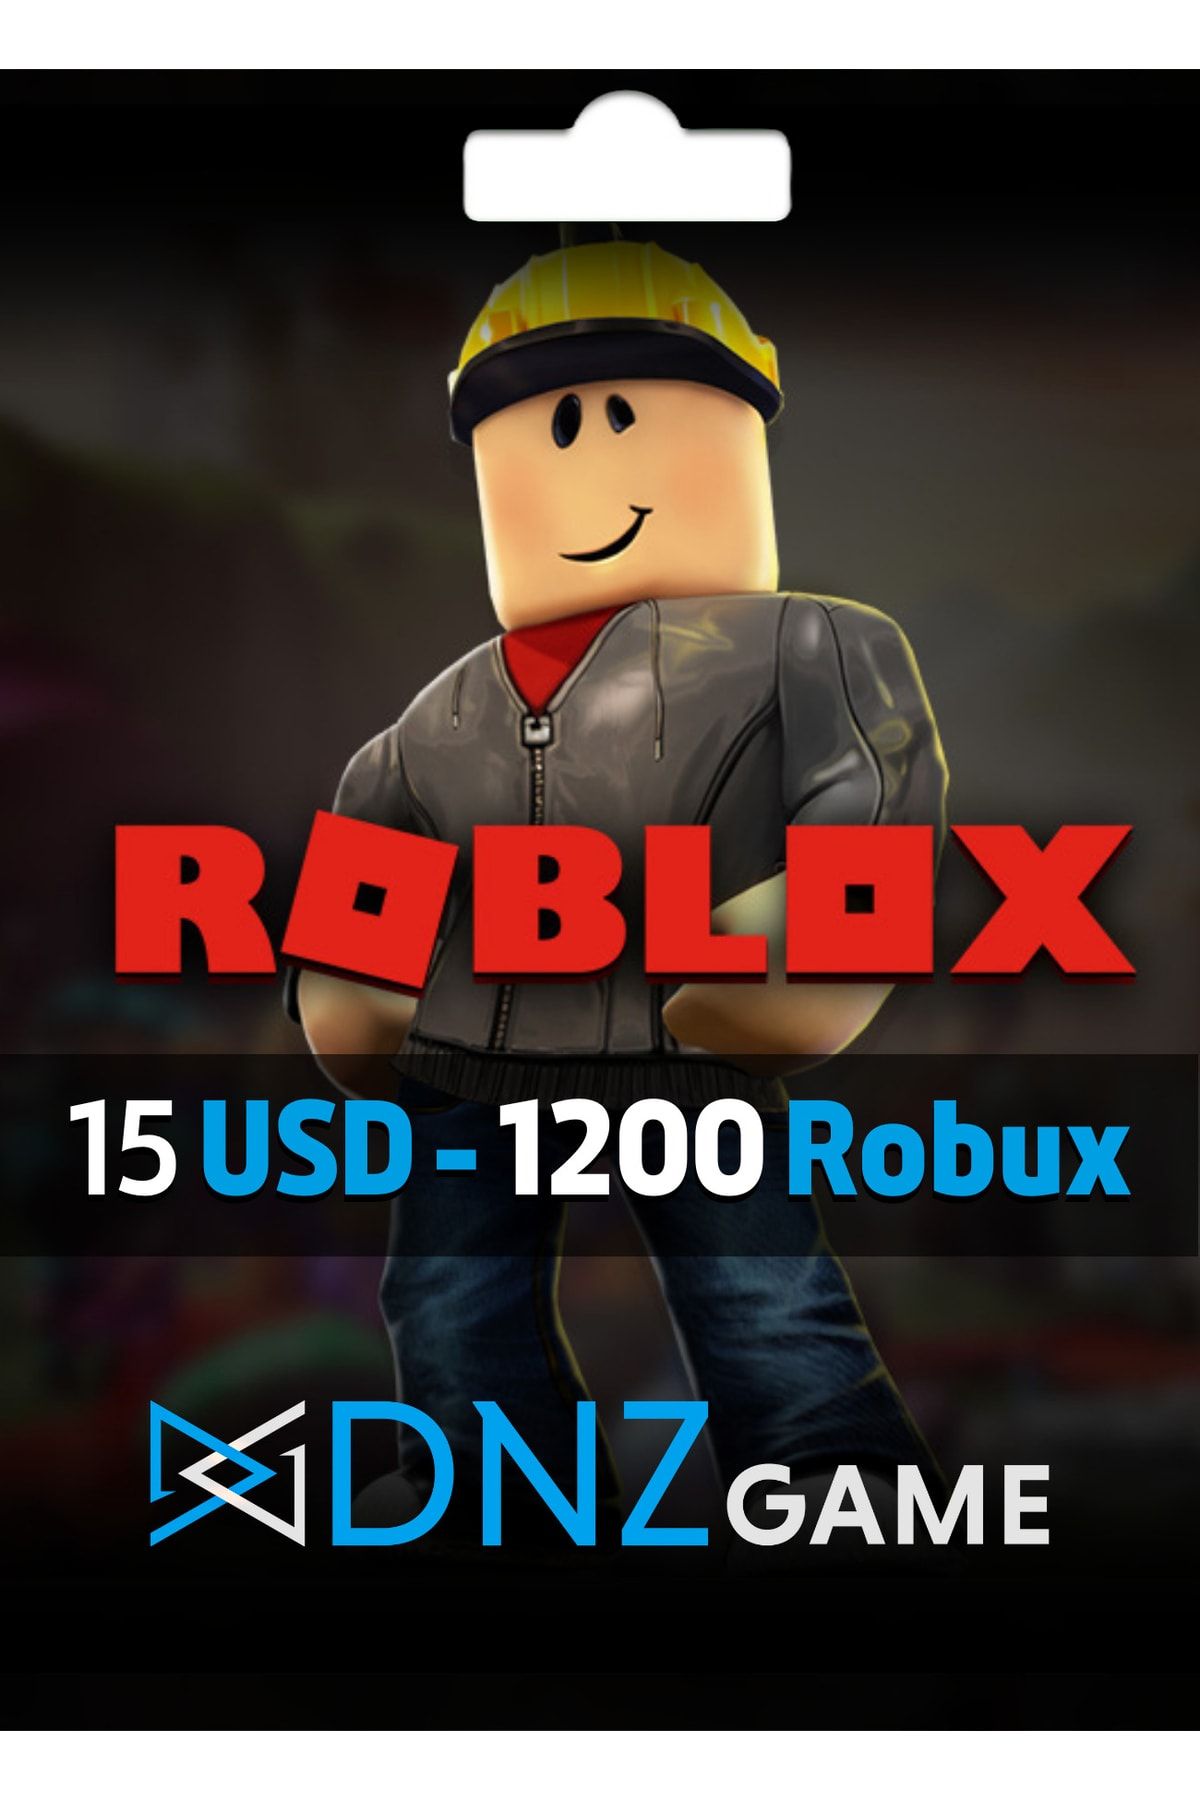 Roblox Gift Card 15 Usd 1200 Robux